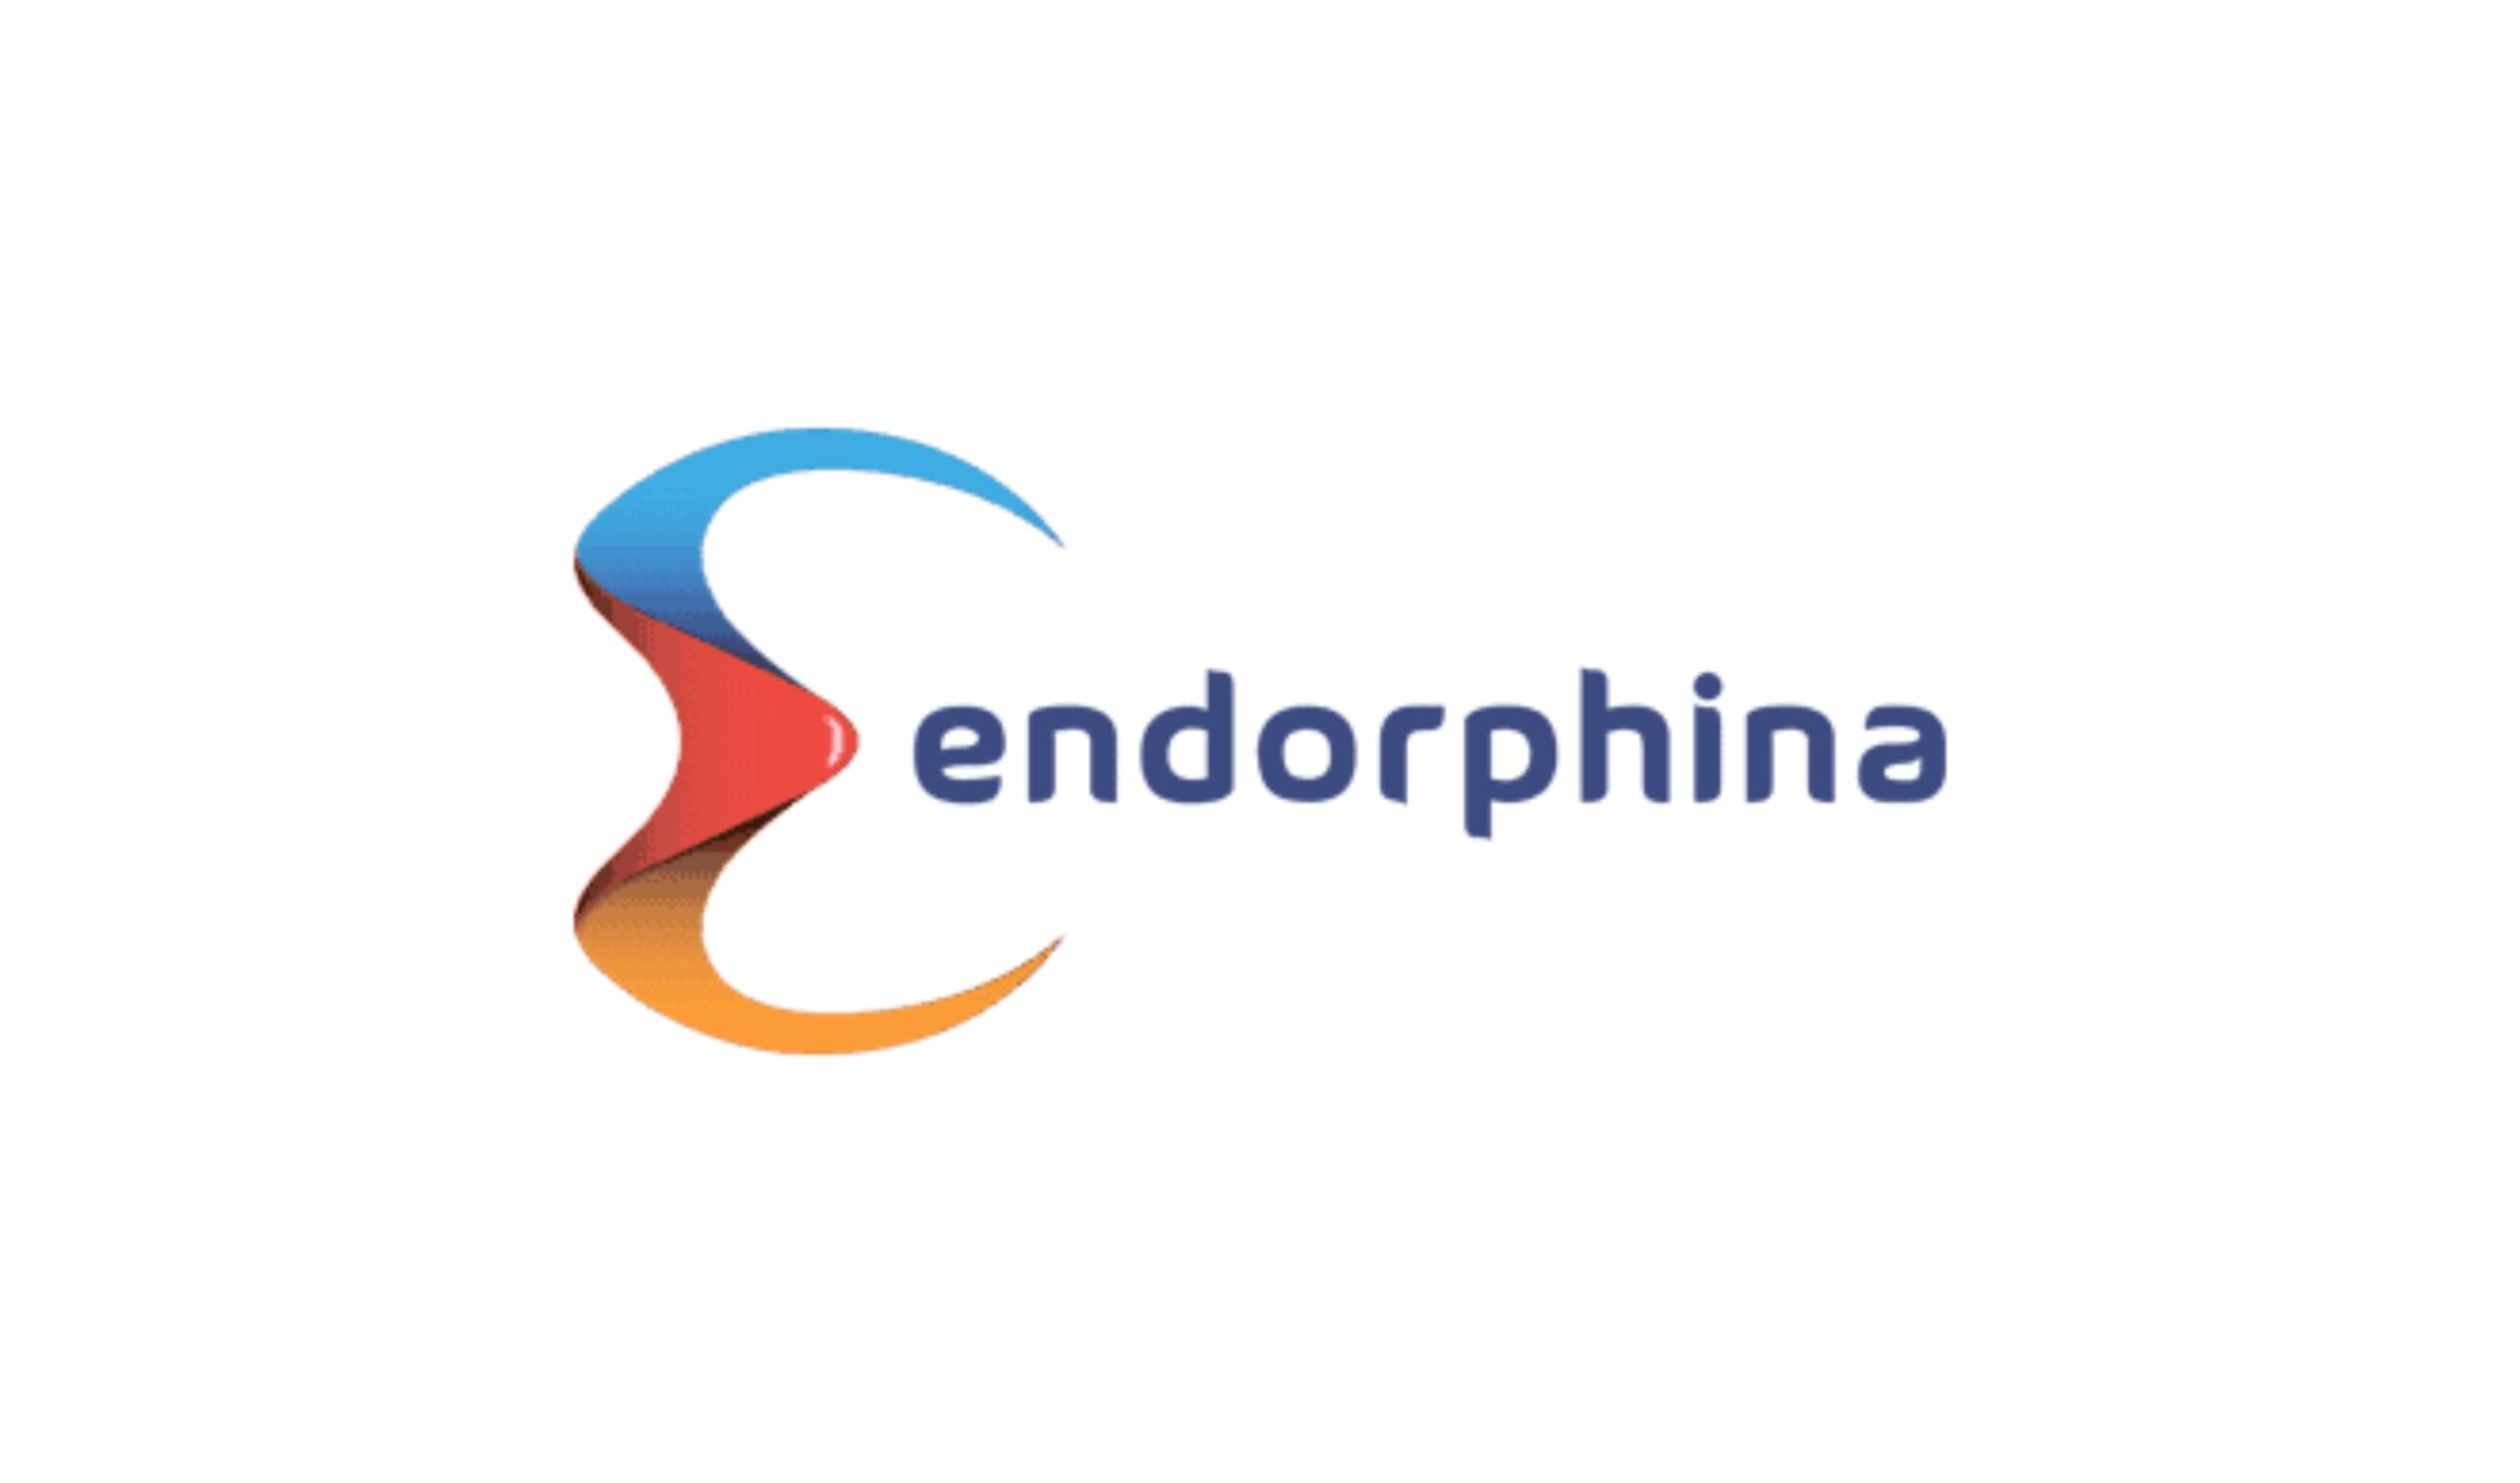 Endorphina teams up with top crypto casino